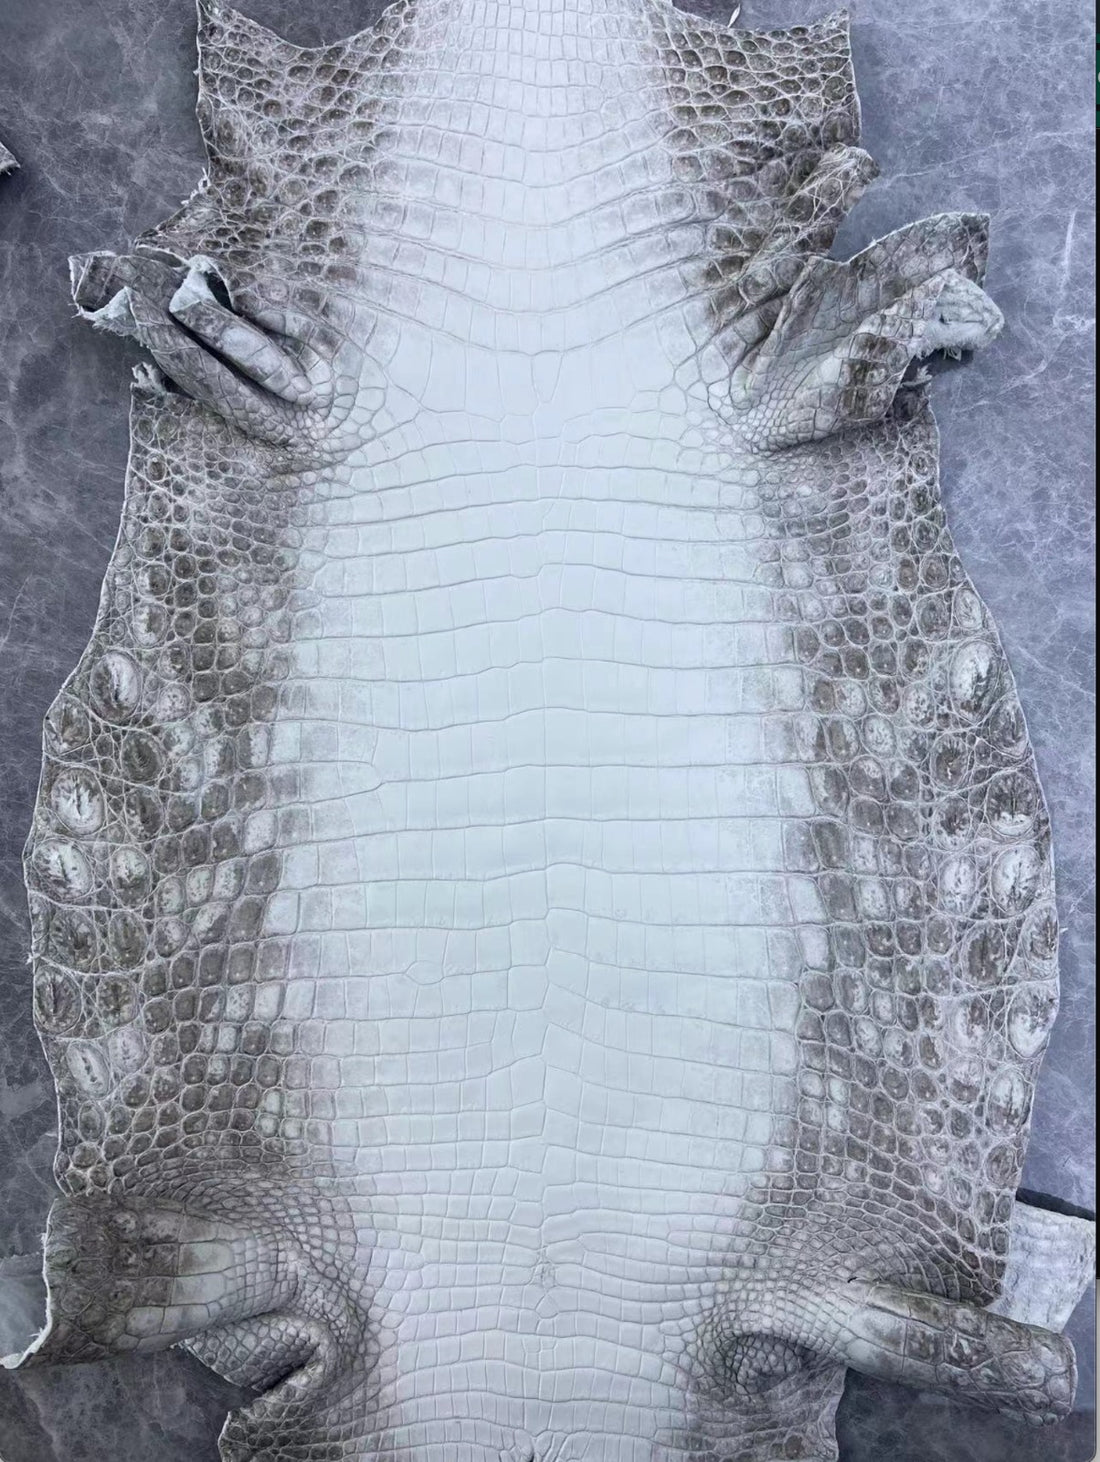 HIMALAYAN CROCODILE - Why the Top Luxury Fashion Brands Desire the Holy Grail of Exotic Leather.